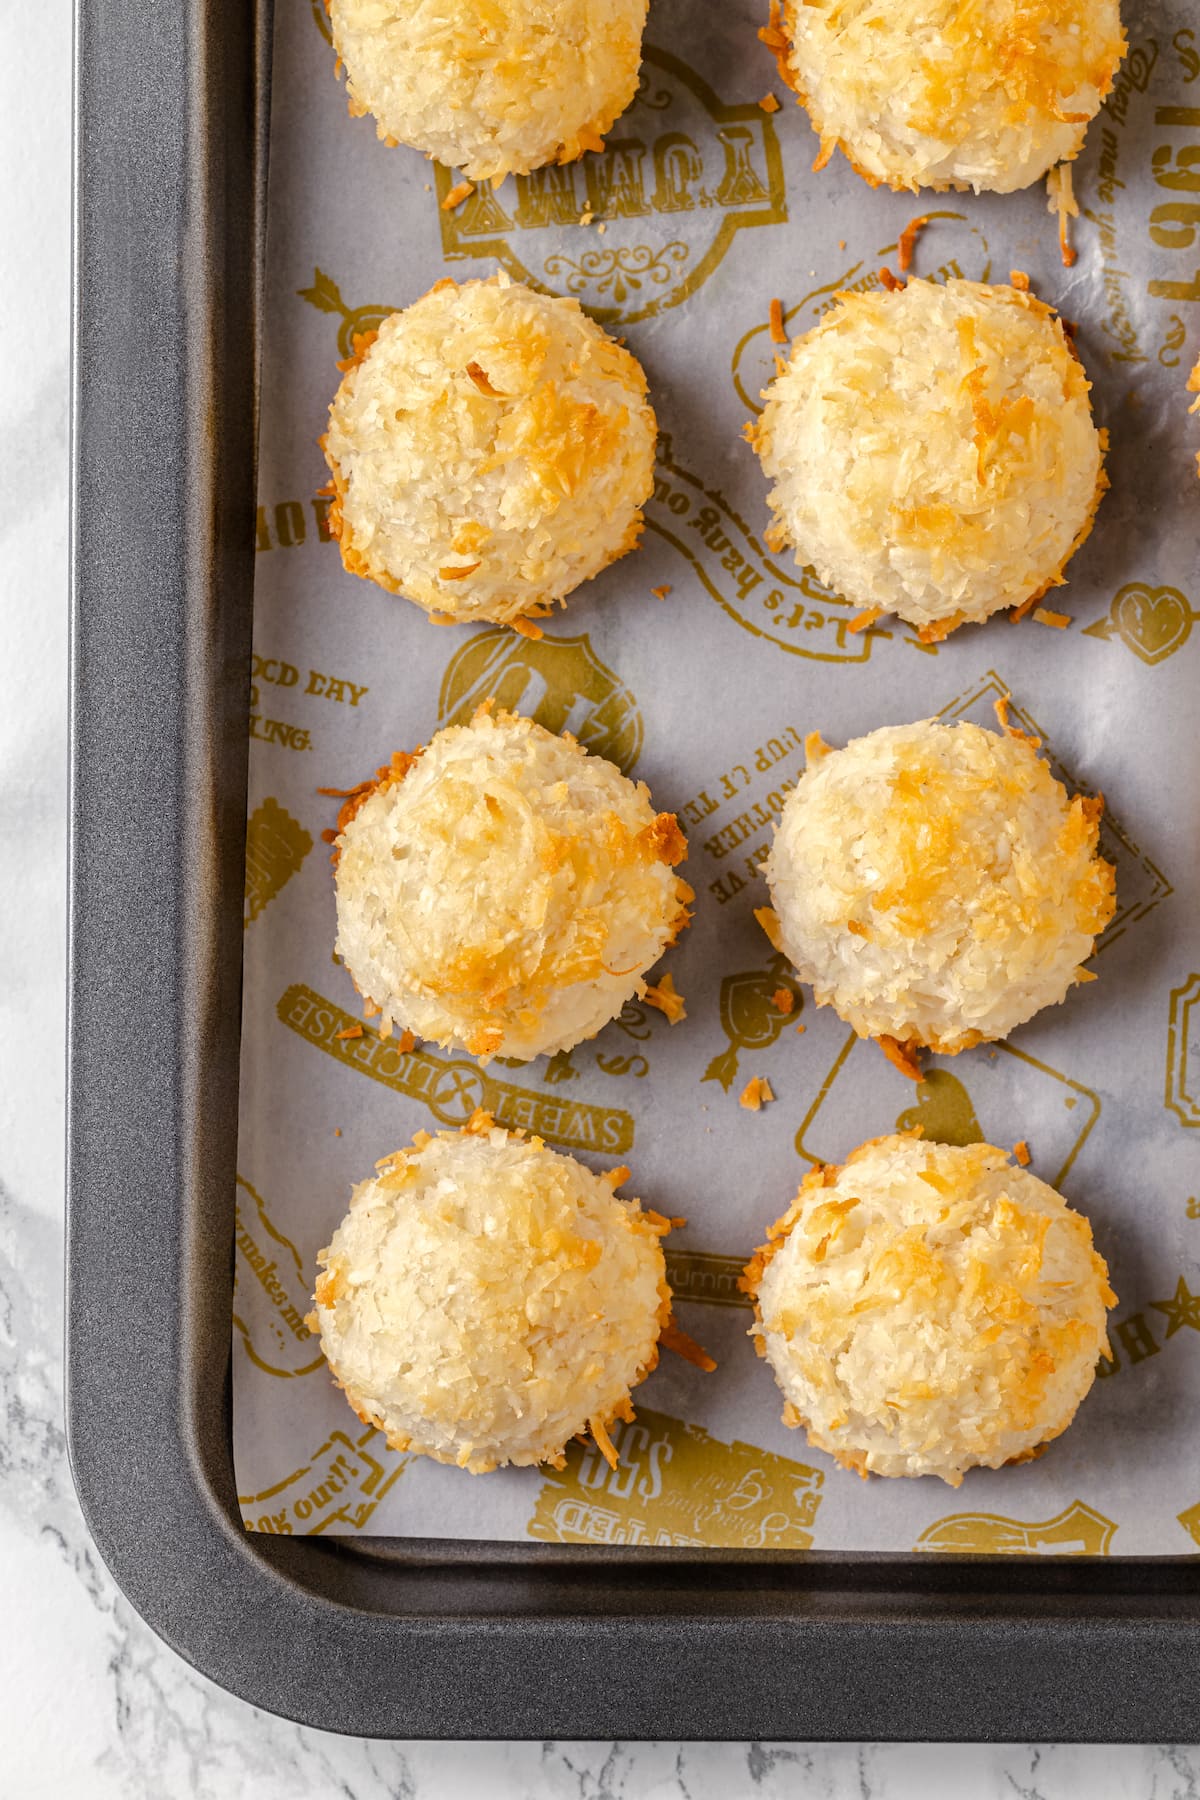 Six coconut macaroons on a baking sheet